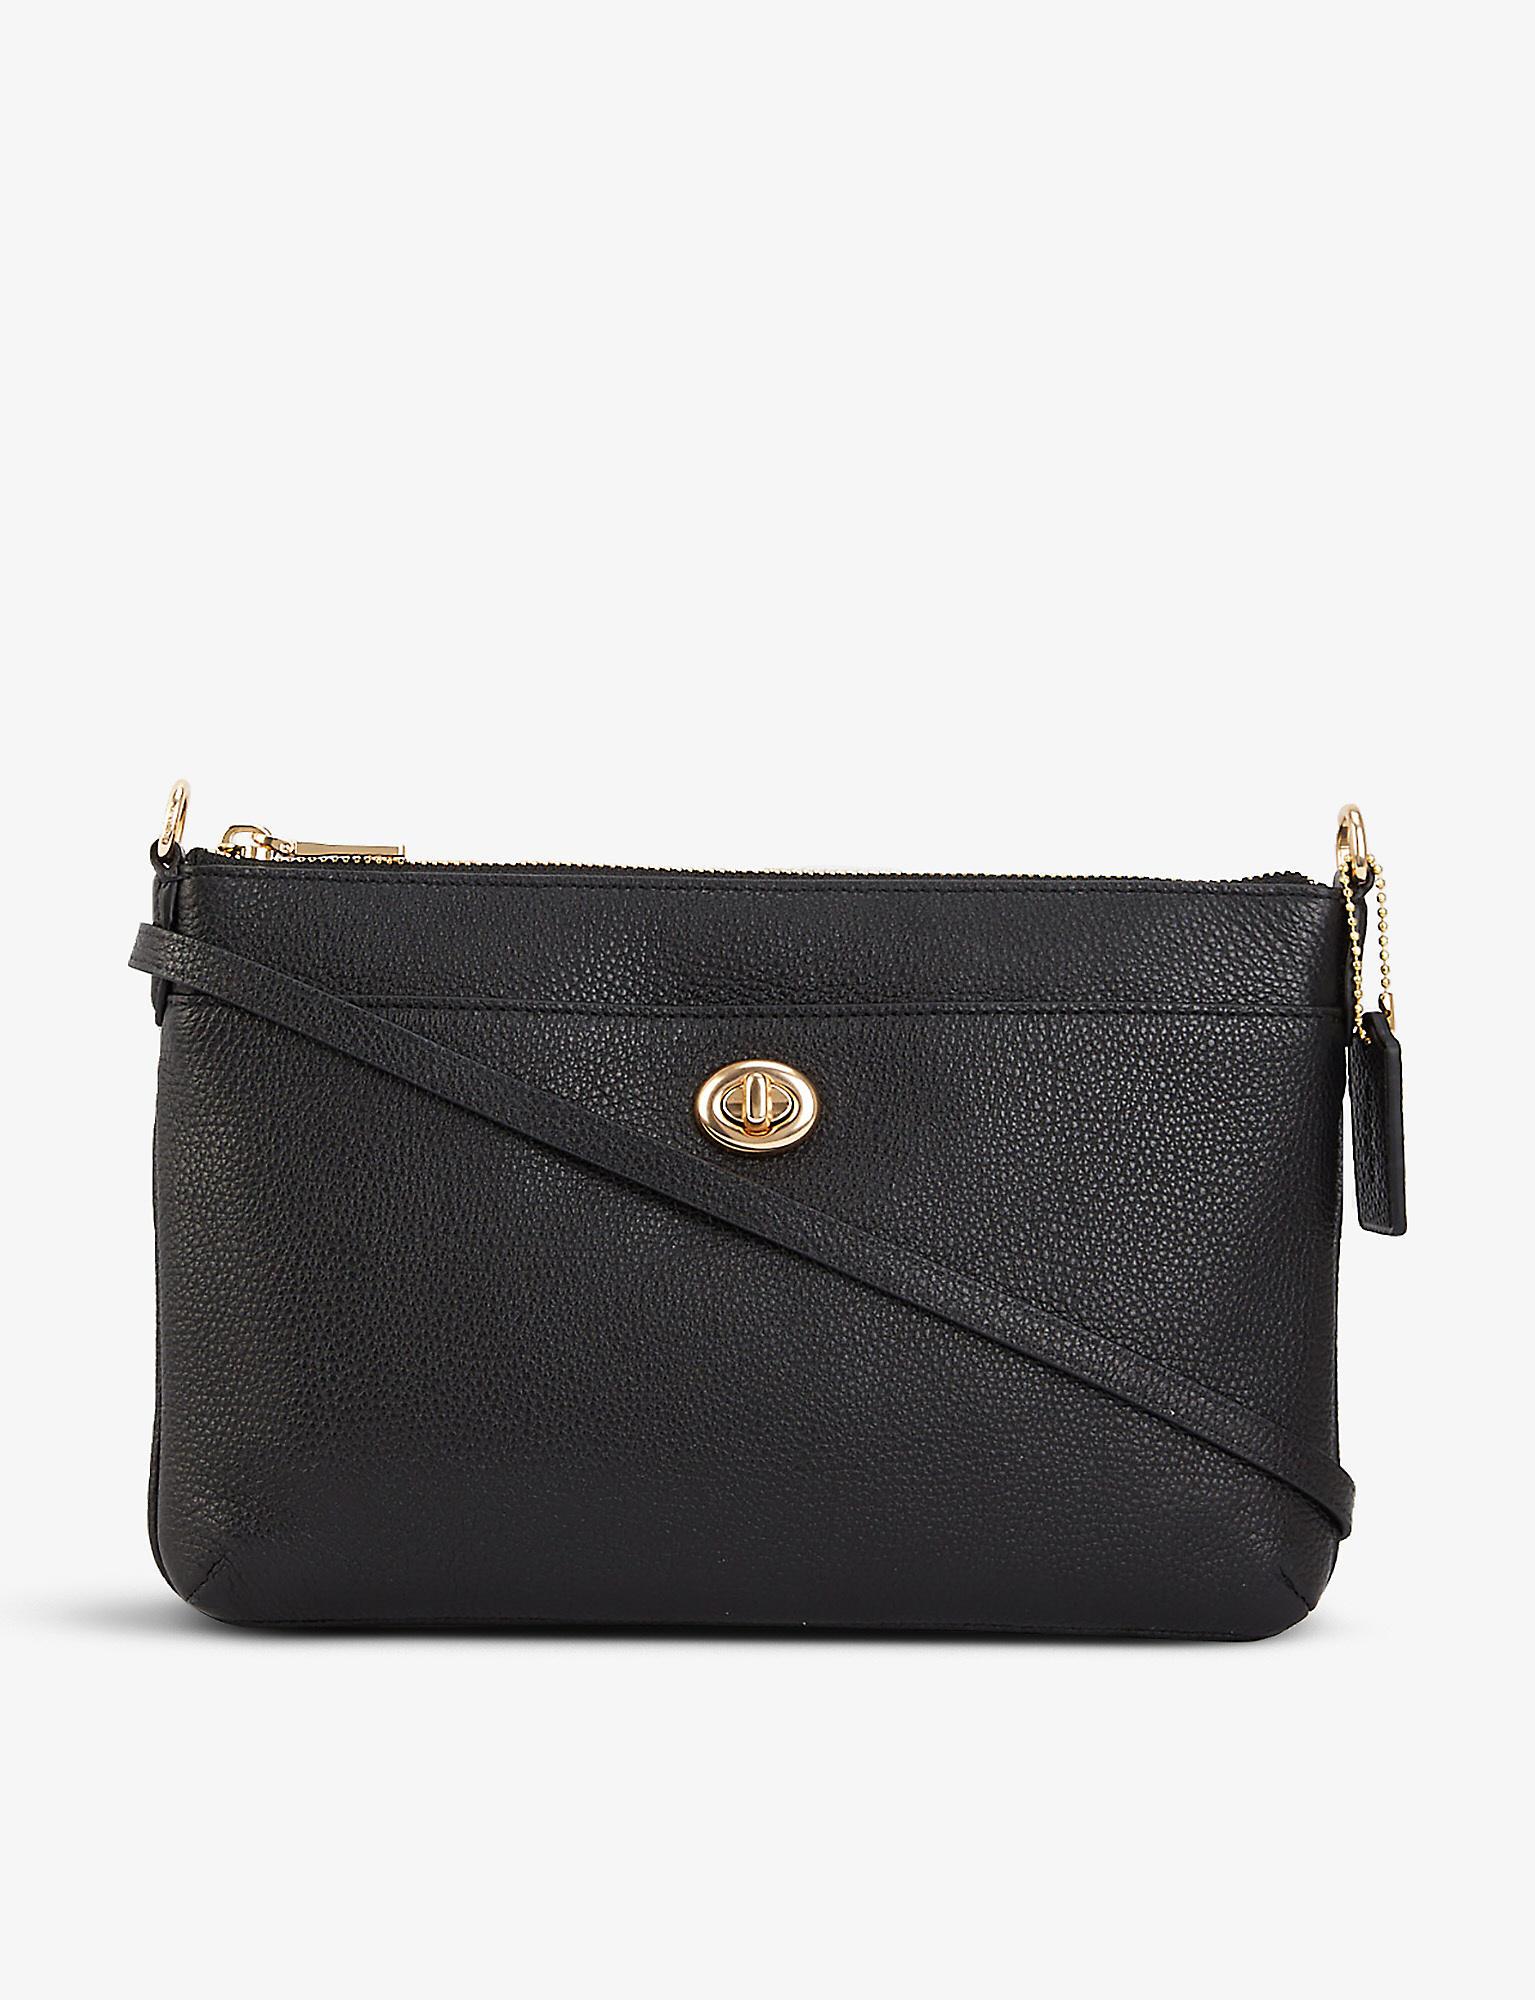 COACH Polly Pebbled Leather Crossbody Bag in Black | Lyst